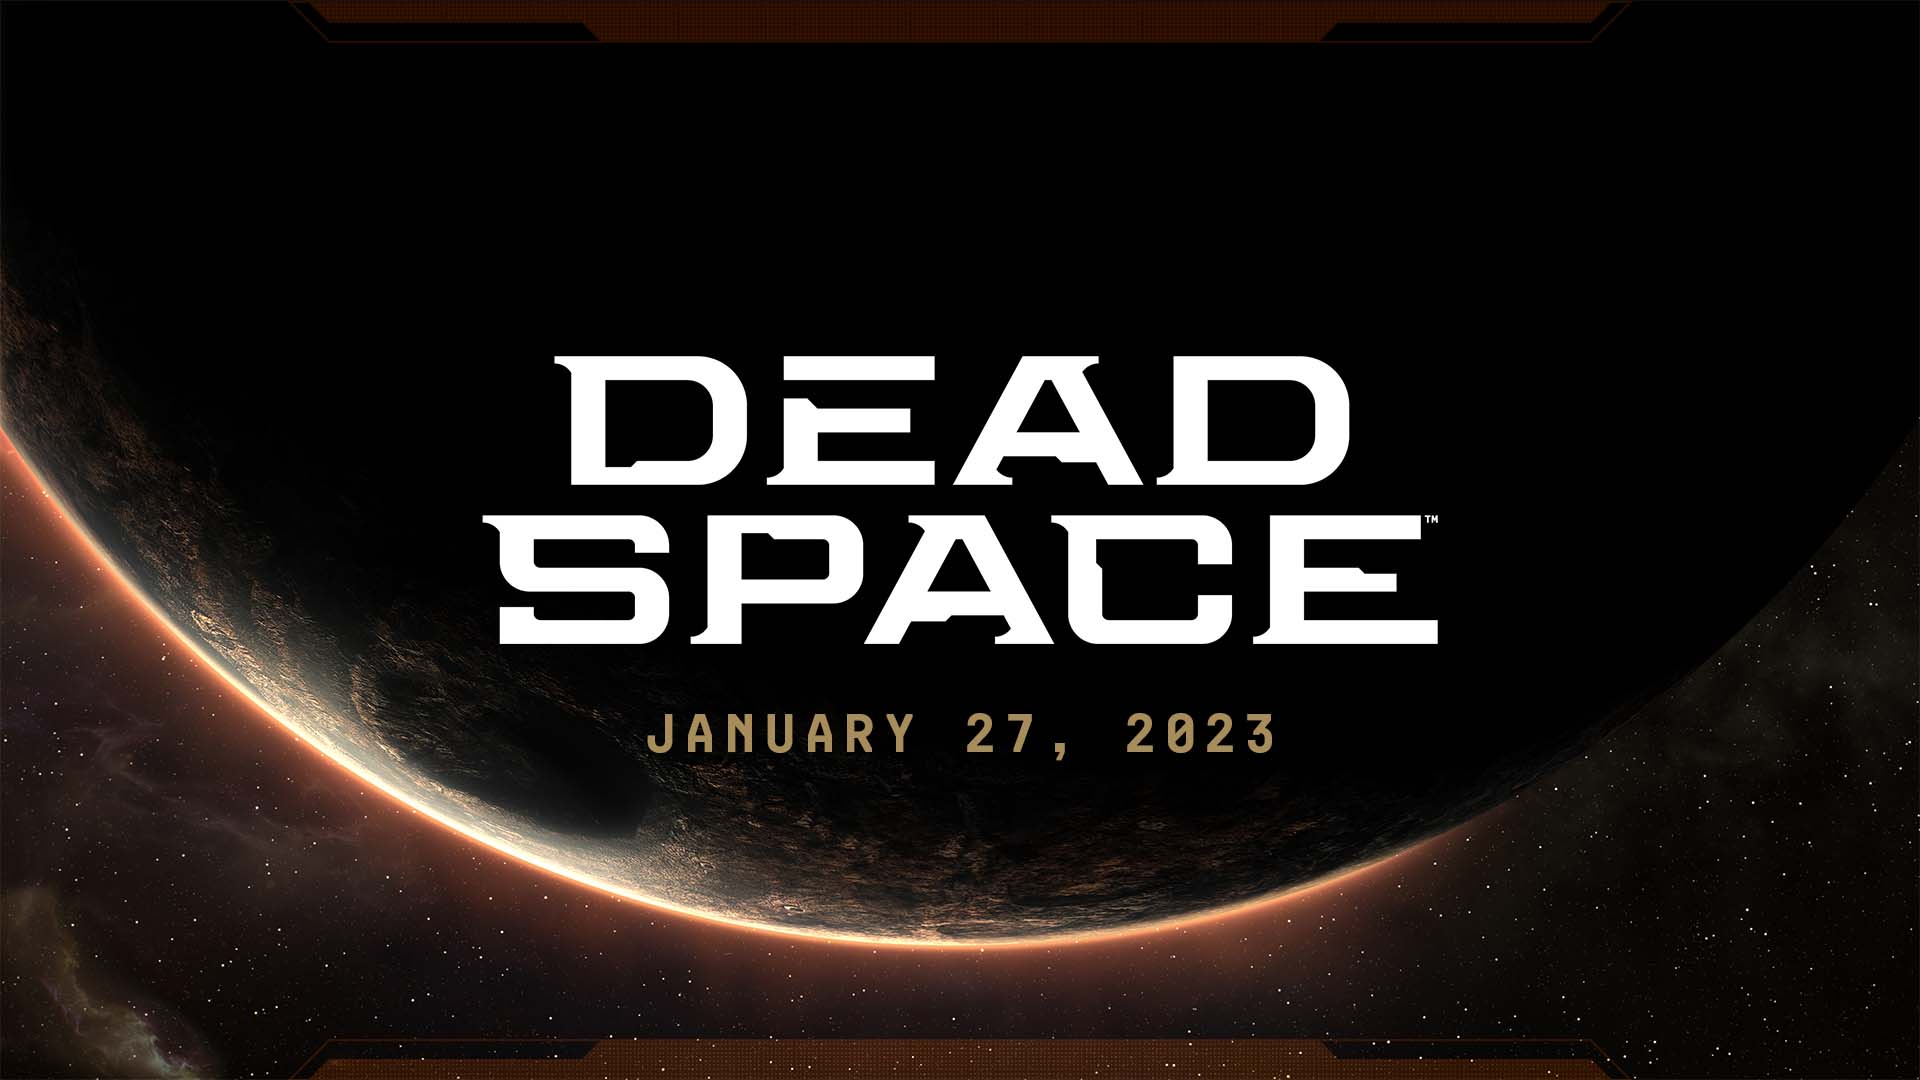 Dead space 2023